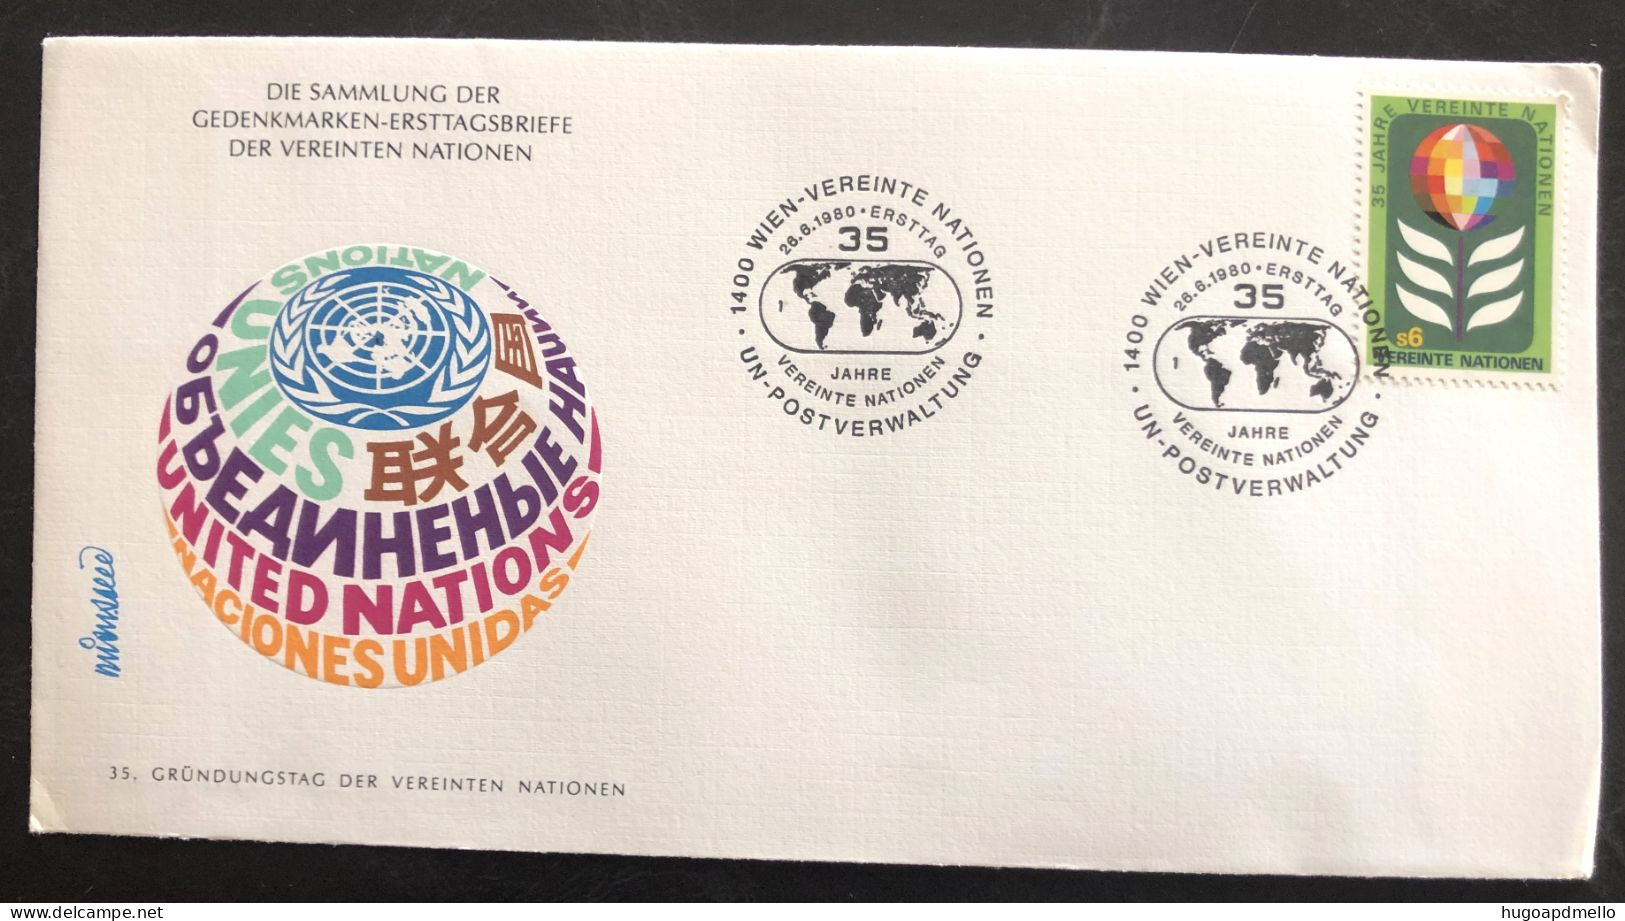 UNITED NATIONS, Uncirculated FDC « 35 TH ANNIVERSARY OF UNITED NATIONS », 1980 - UNO